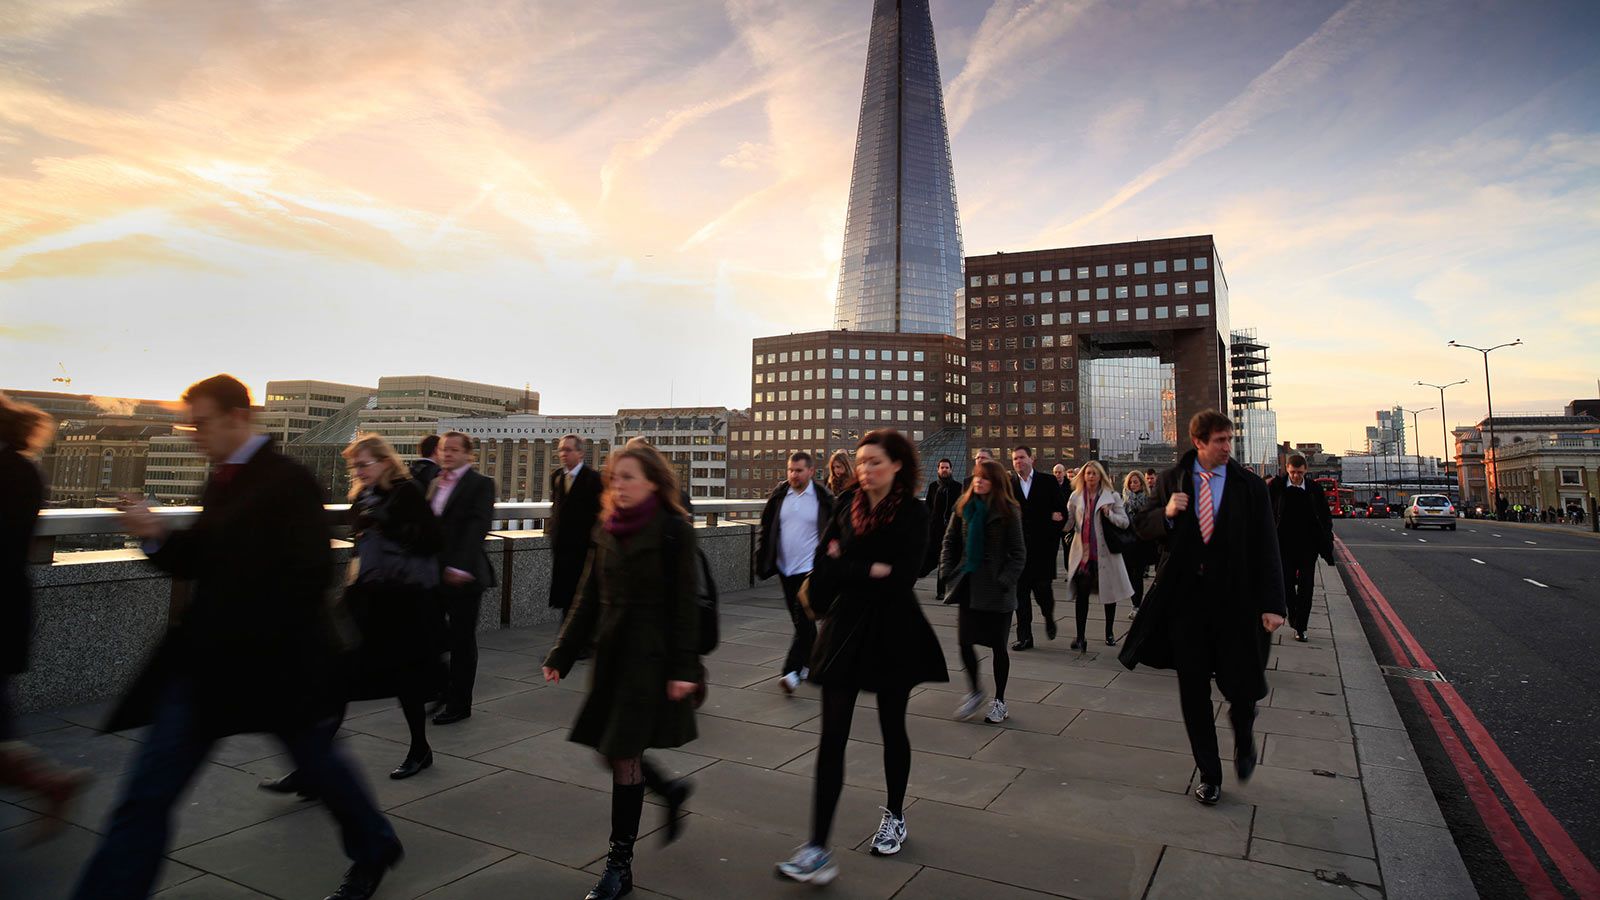 People Walking on London Bridge With The Shard in the Background - Mace Group